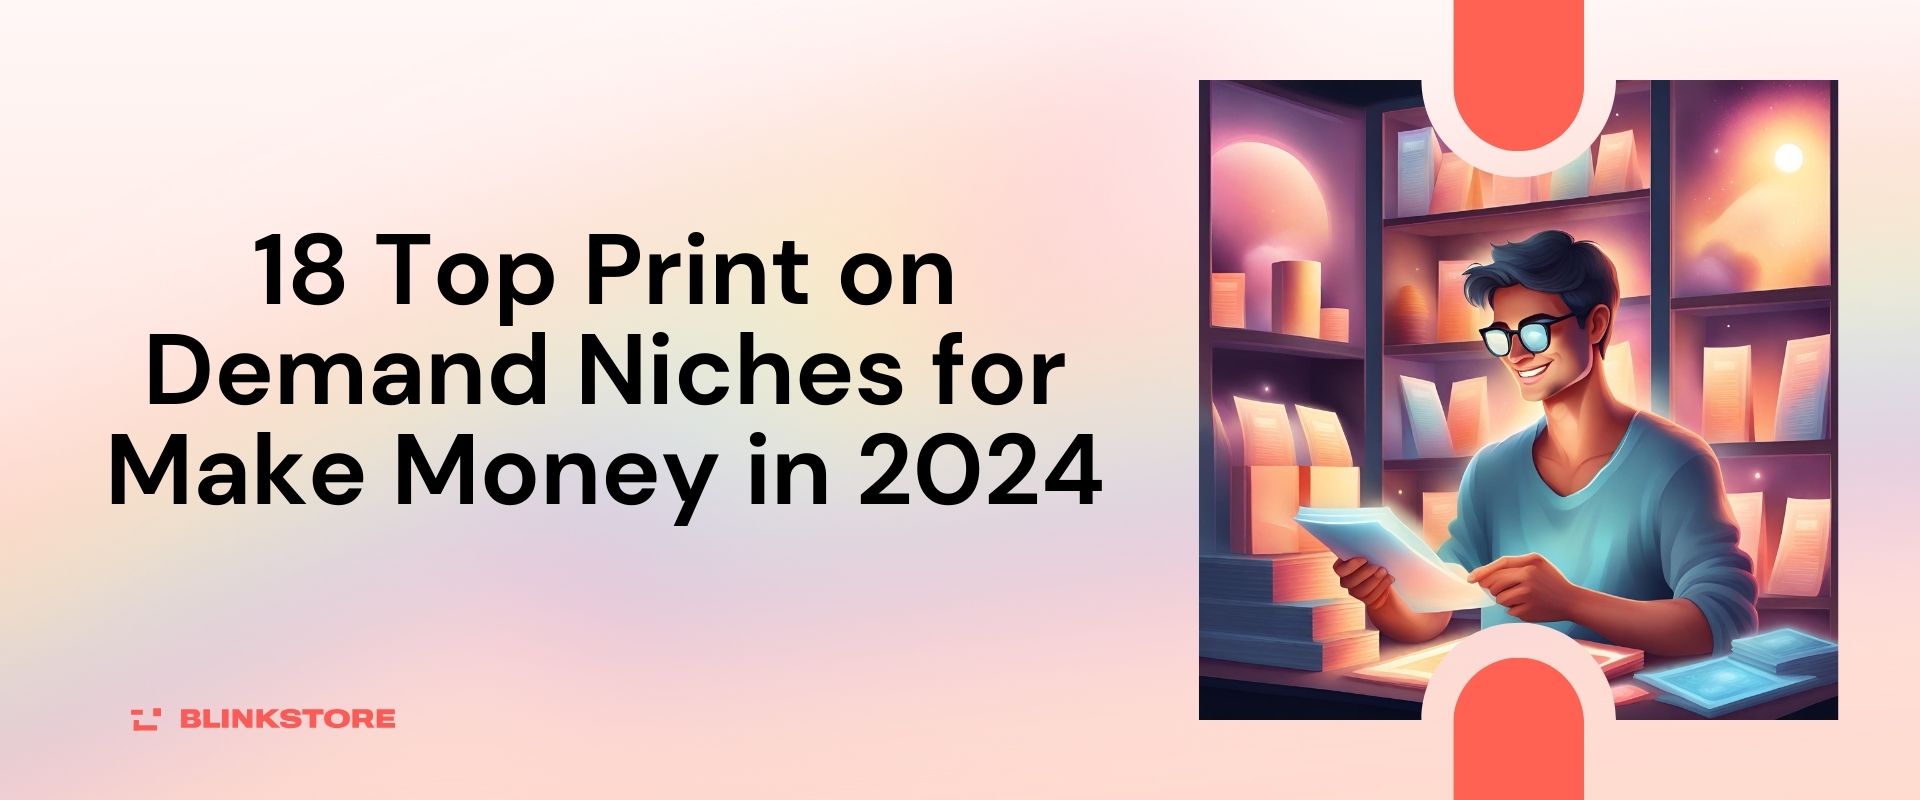 18 Top Print on Demand Niches for Make Money in 2024